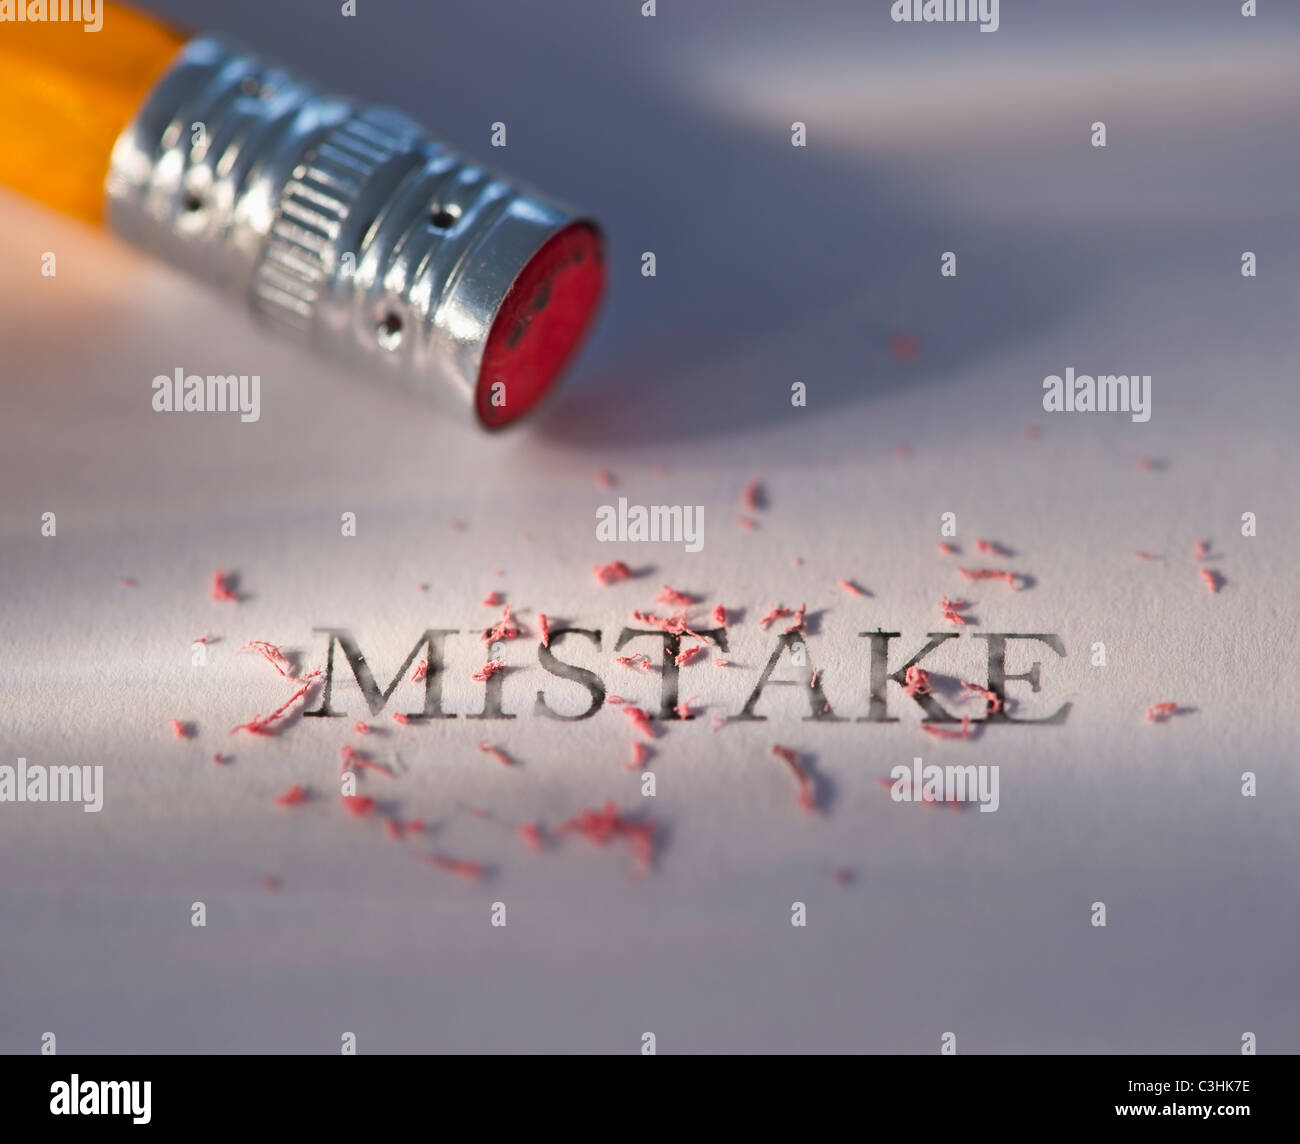 Studio shot of pencil erasing the word mistake from piece of paper Stock Photo